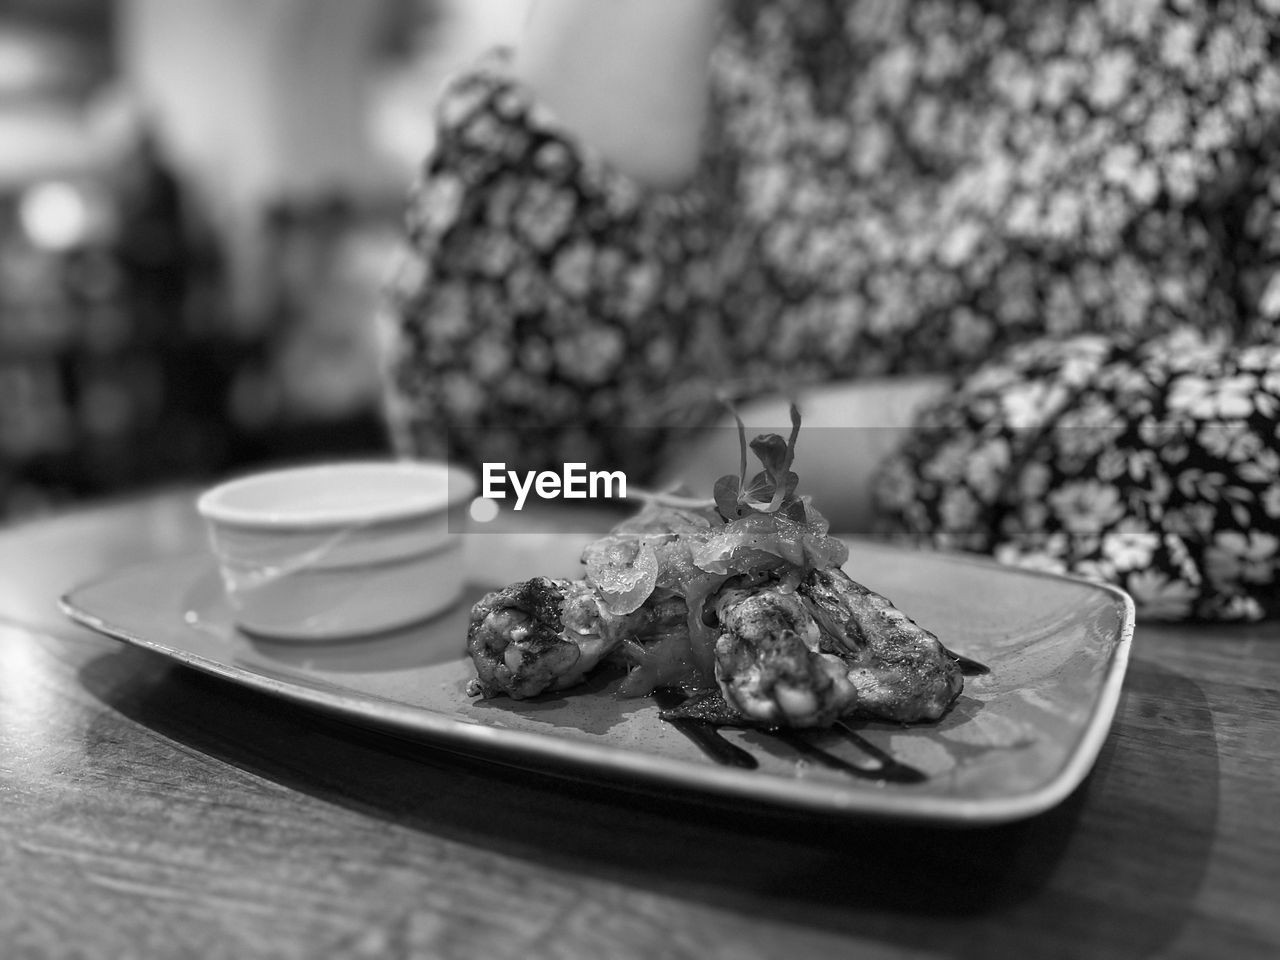 food and drink, food, plate, table, black, black and white, tableware, monochrome photography, monochrome, freshness, selective focus, no people, white, indoors, focus on foreground, healthy eating, wellbeing, crockery, close-up, nature, plant, drink, saucer